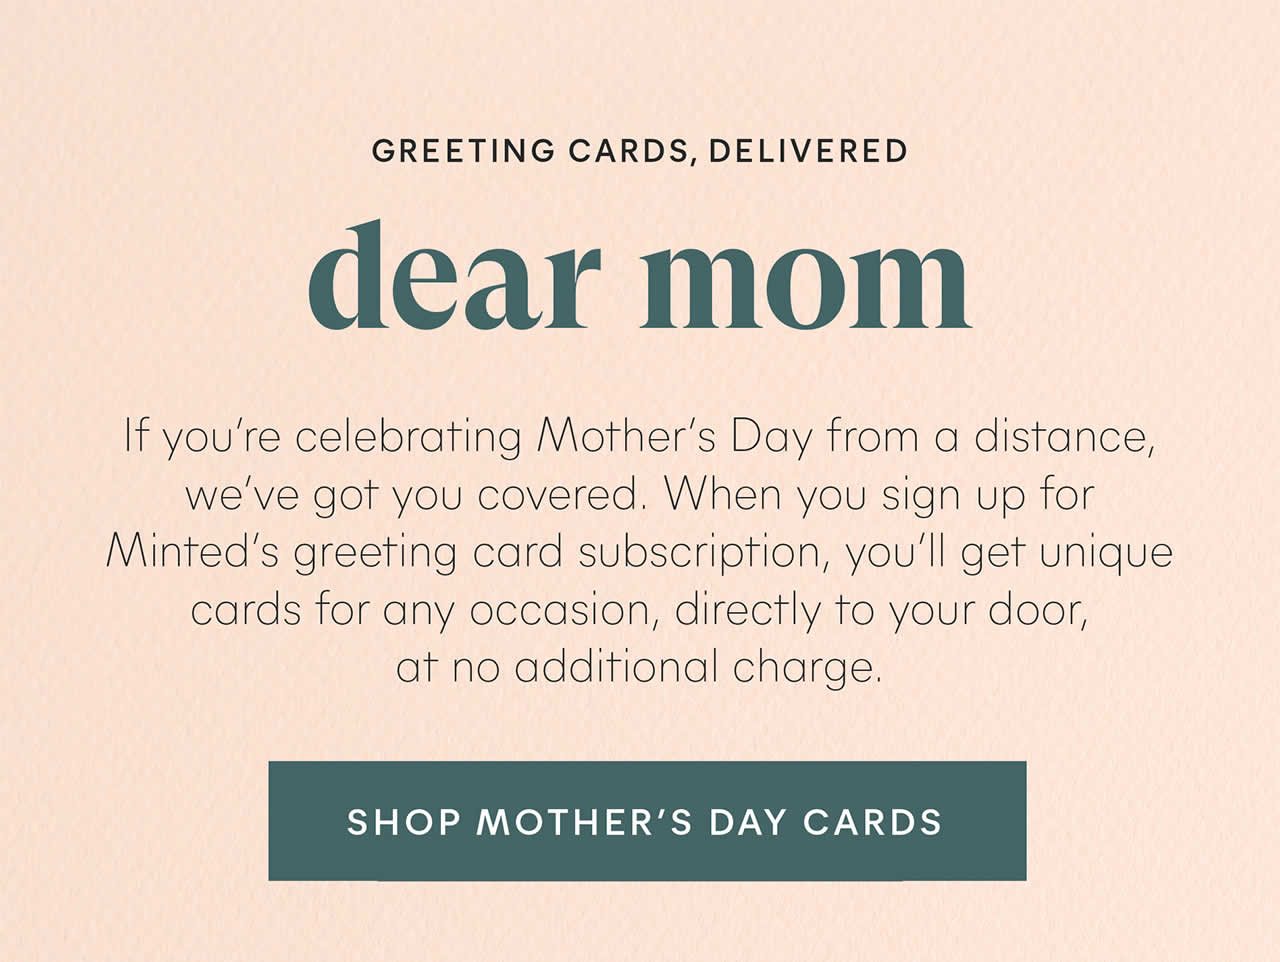 Shop Mother's Day Cards